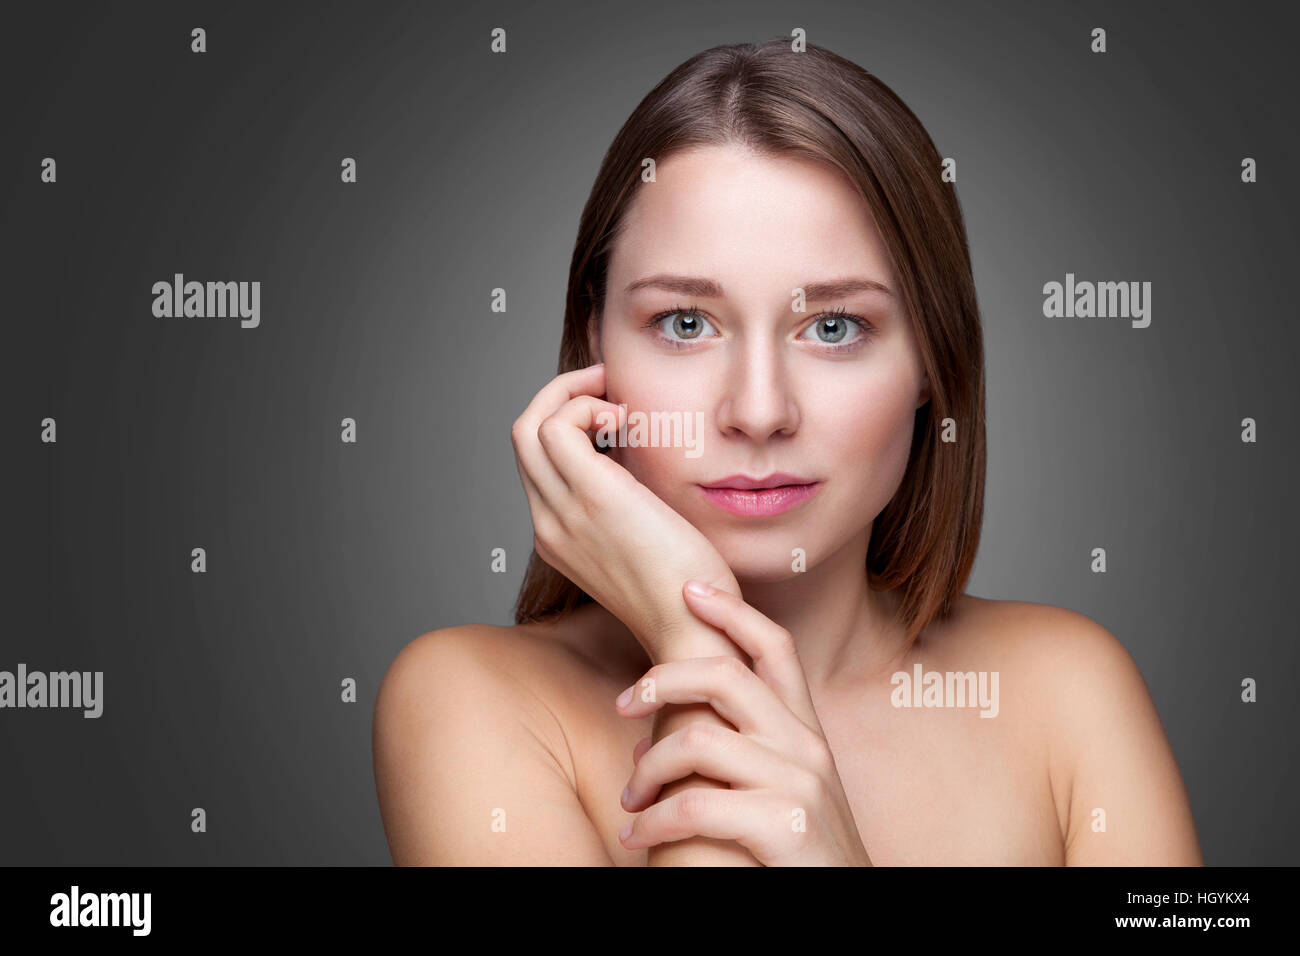 Young naturally beautiful woman with great skin complexion Stock Photo